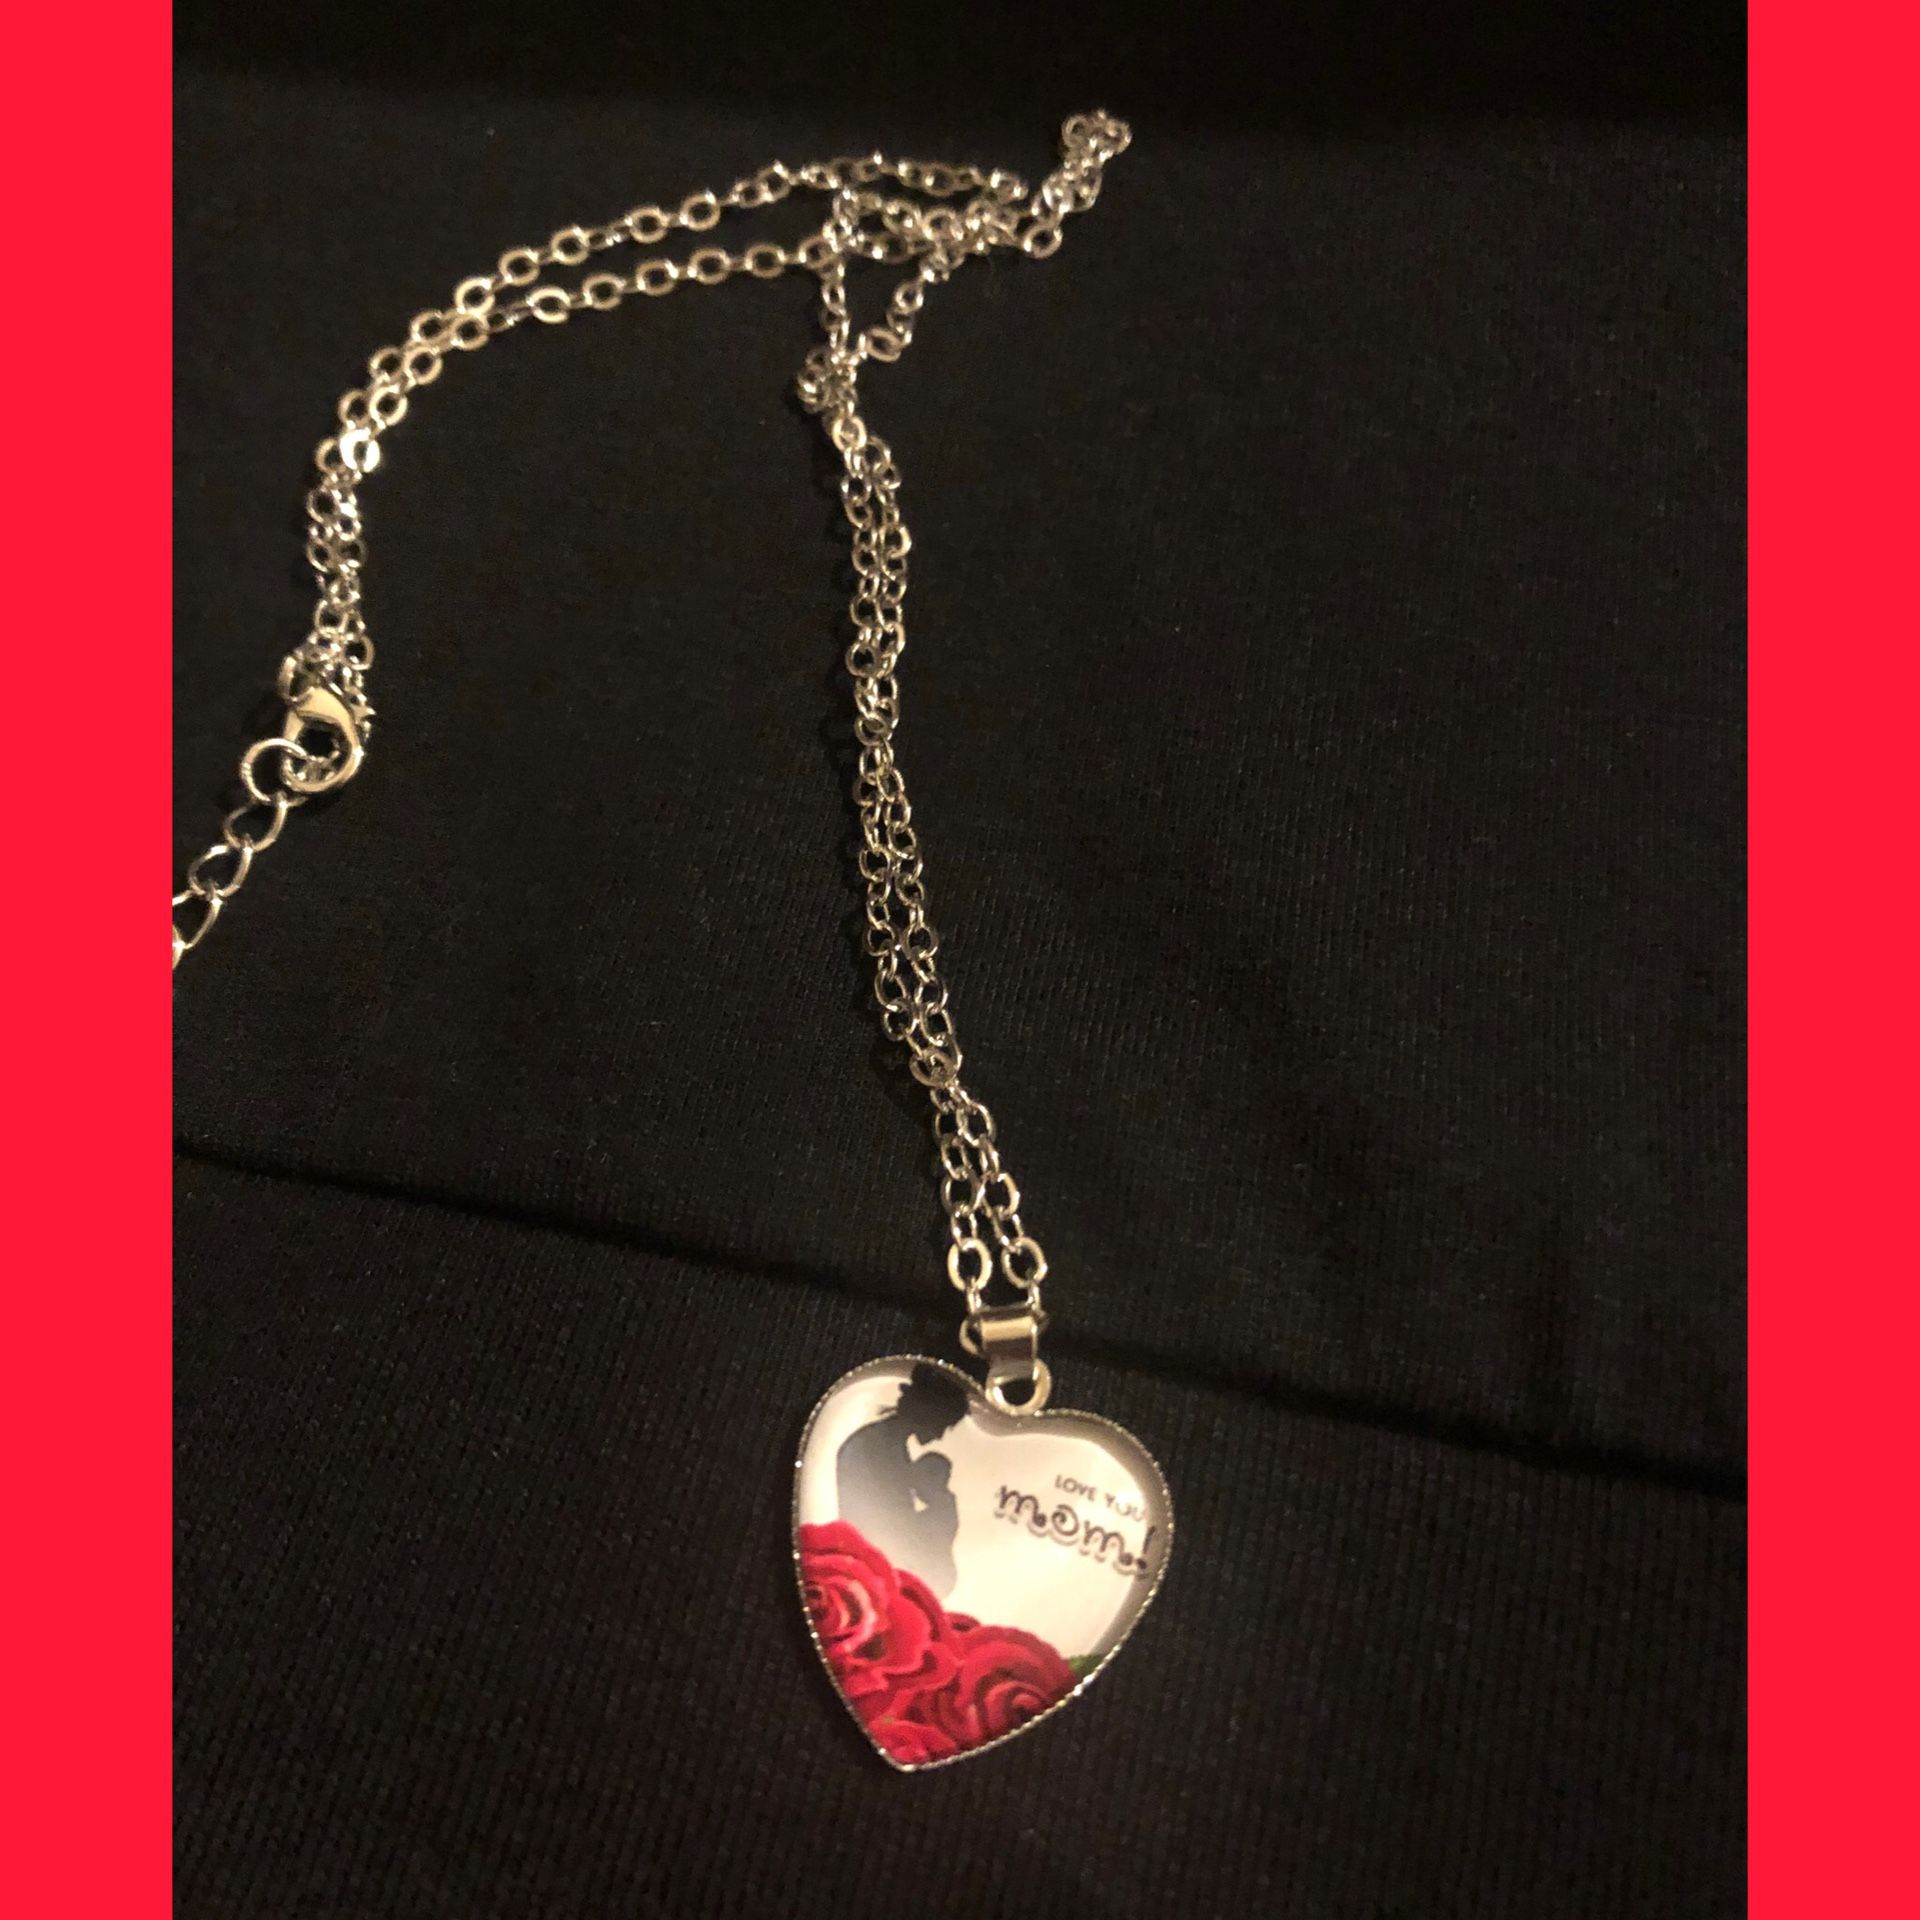 Love you mom necklace